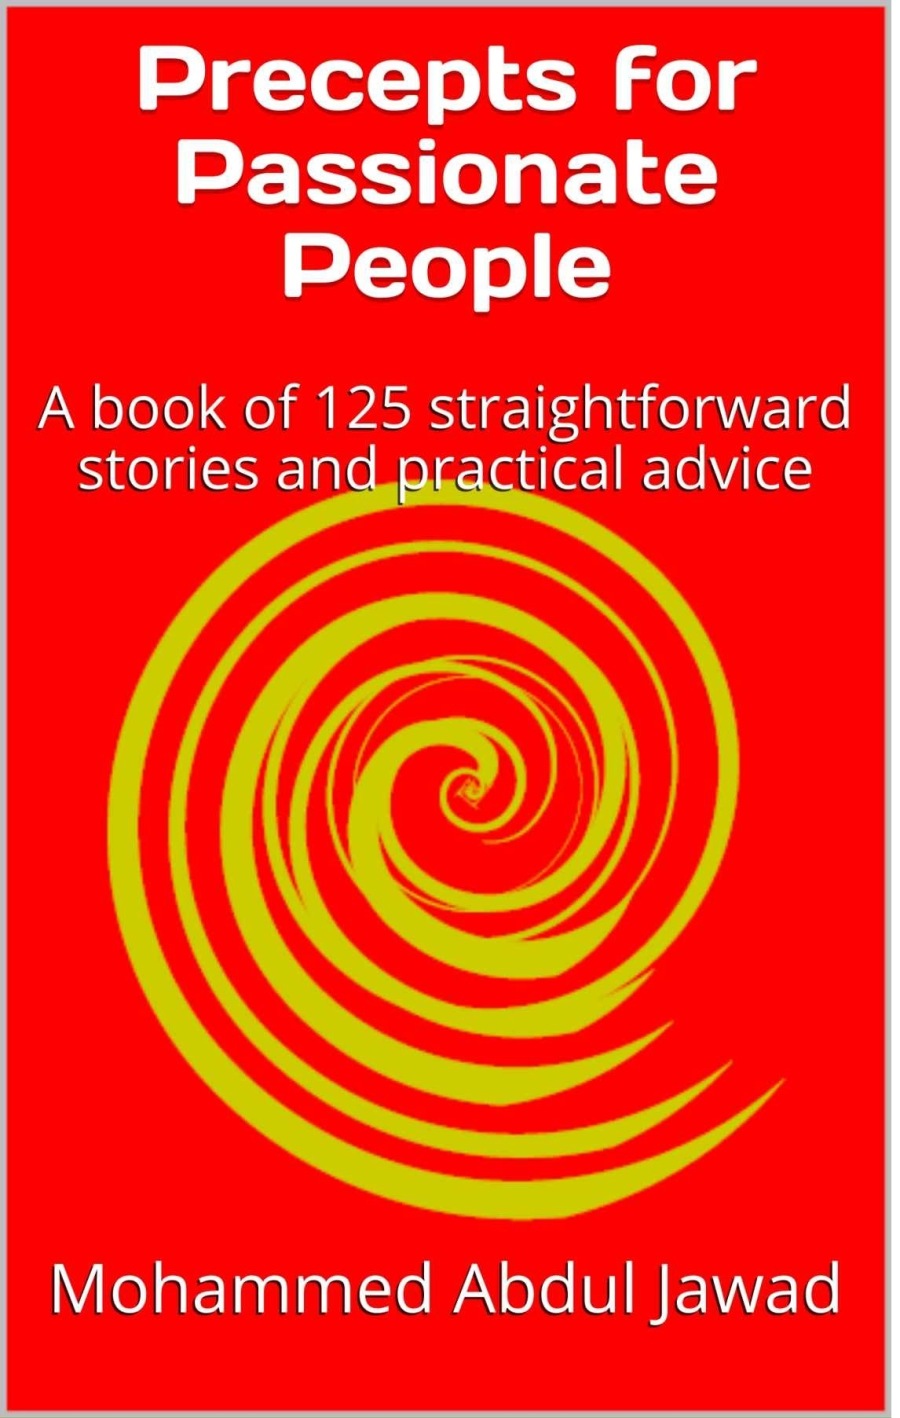 Precepts for
Passionate
People

A book of 125 straightforward
stories and pgactical advice

Mohammed Abdul Jawad